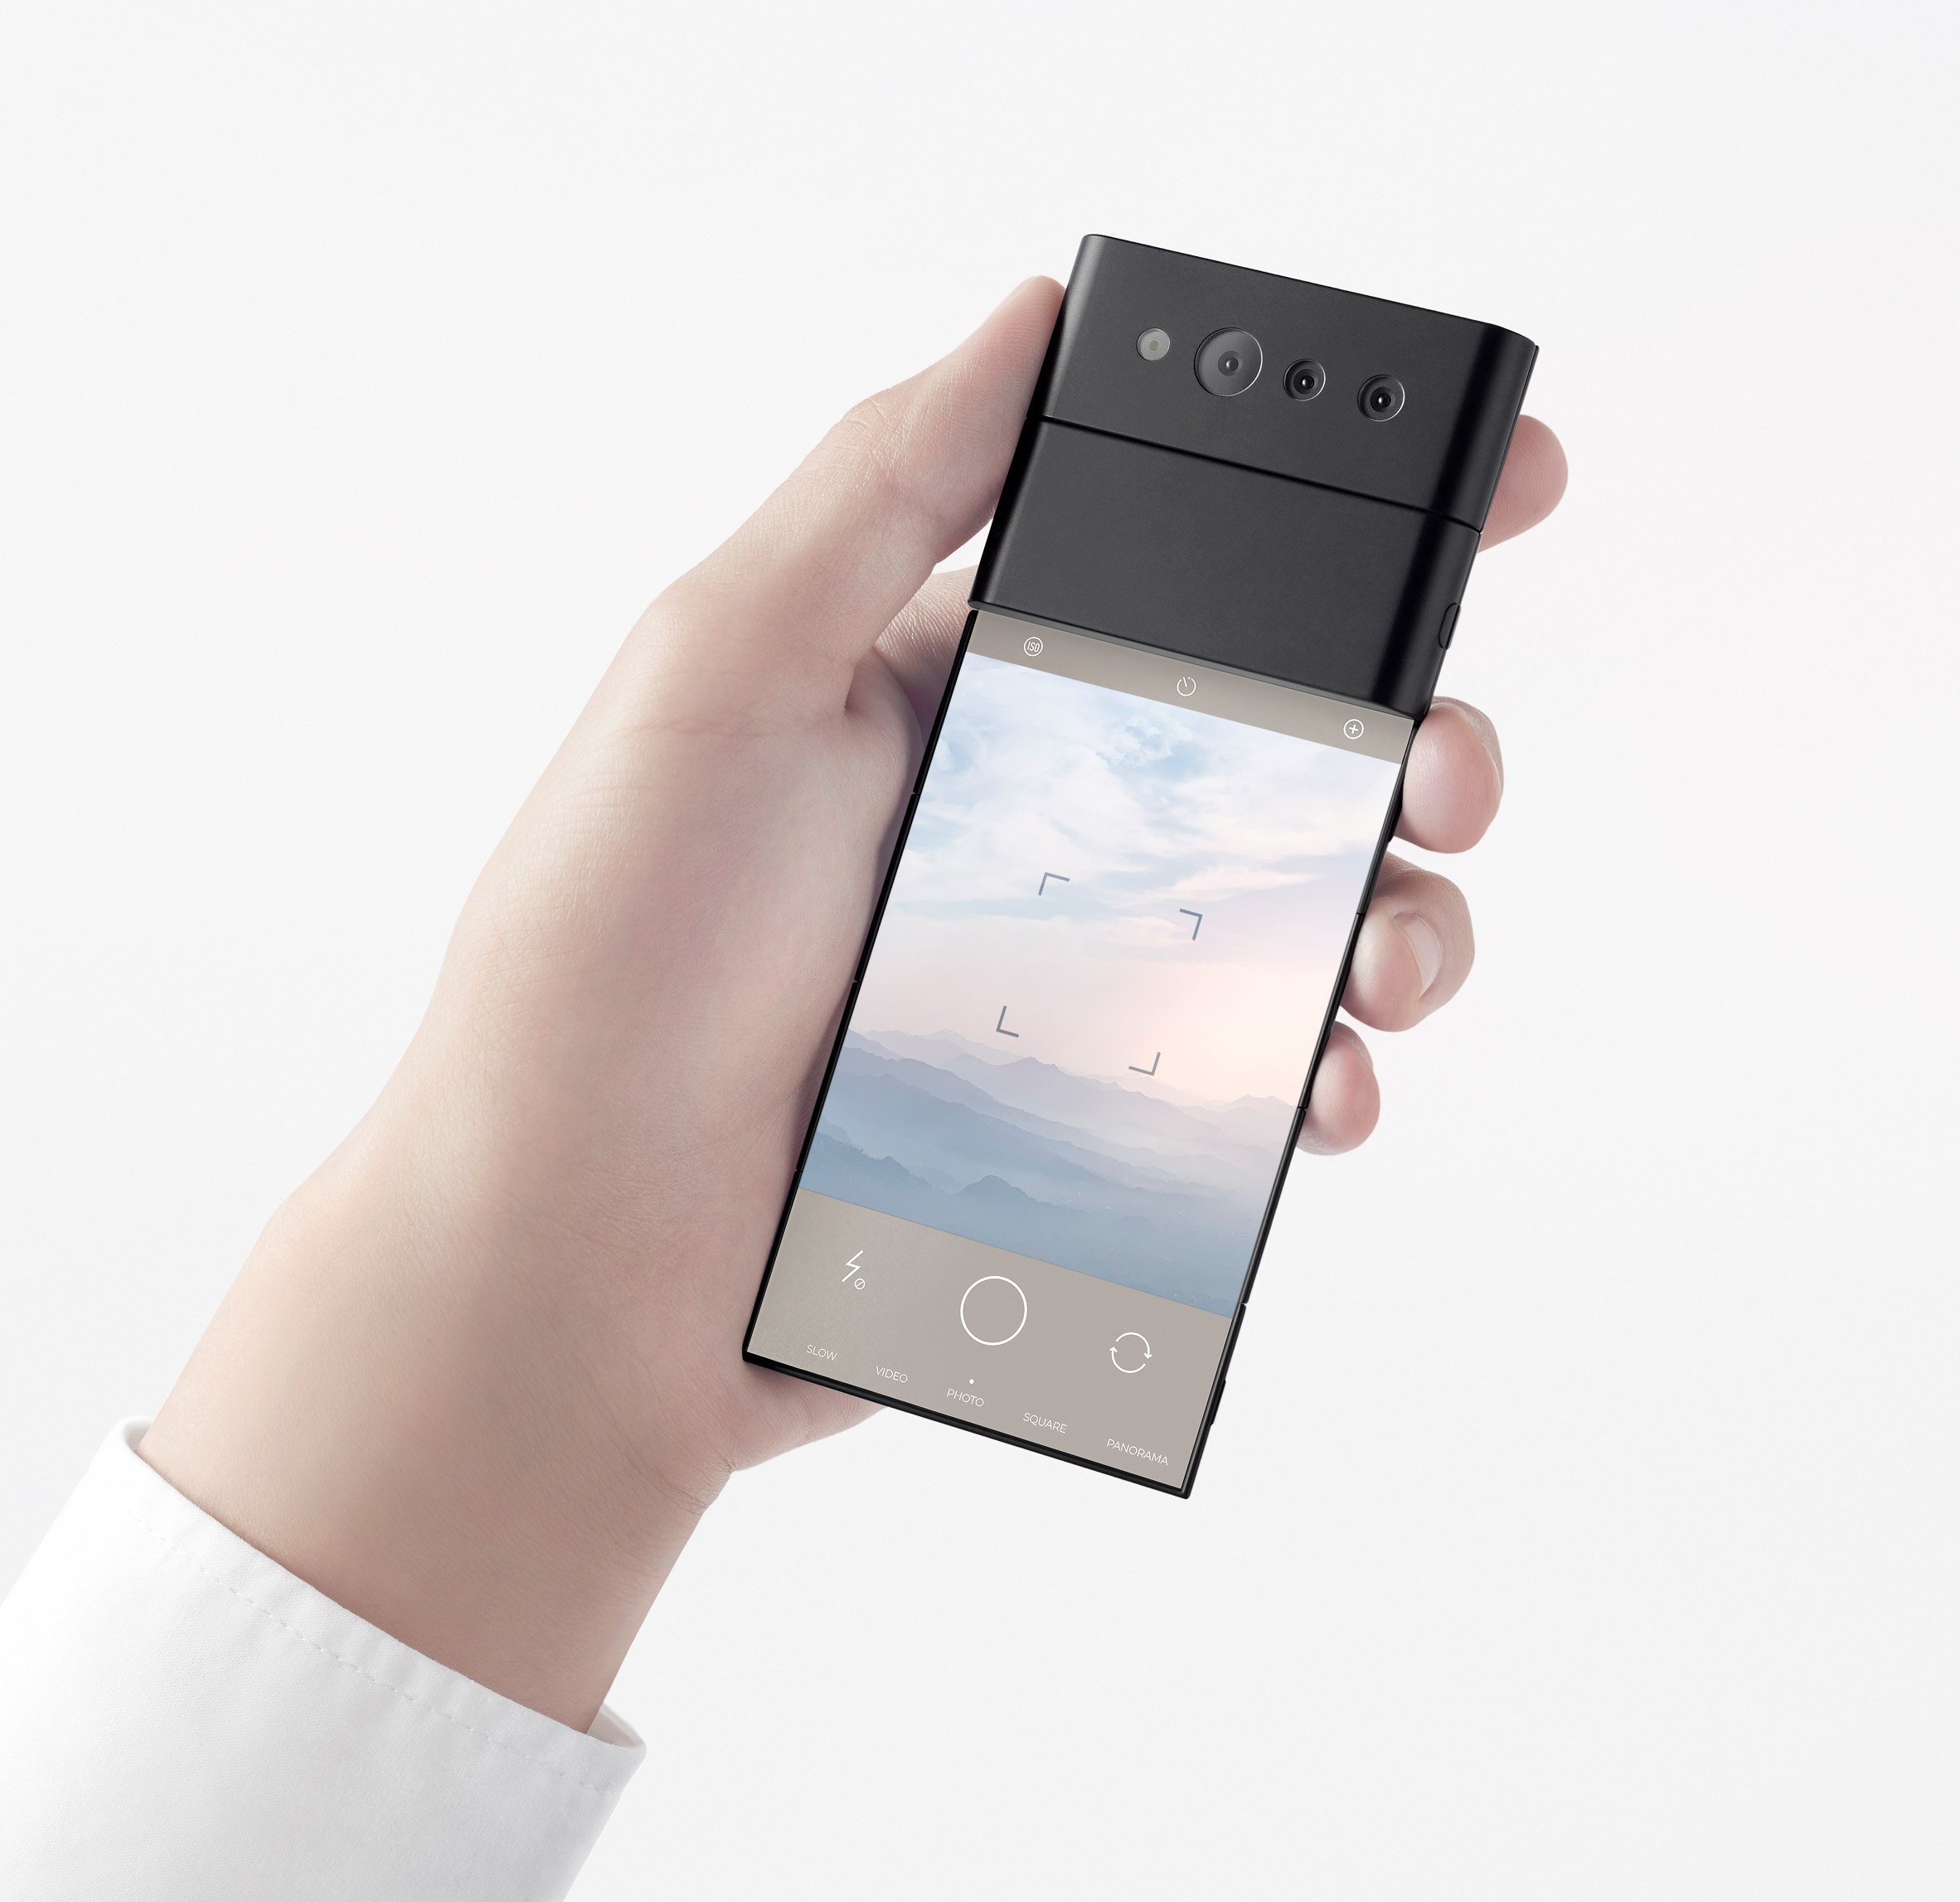 The Slide-Phone concept by Nendo for OPPO